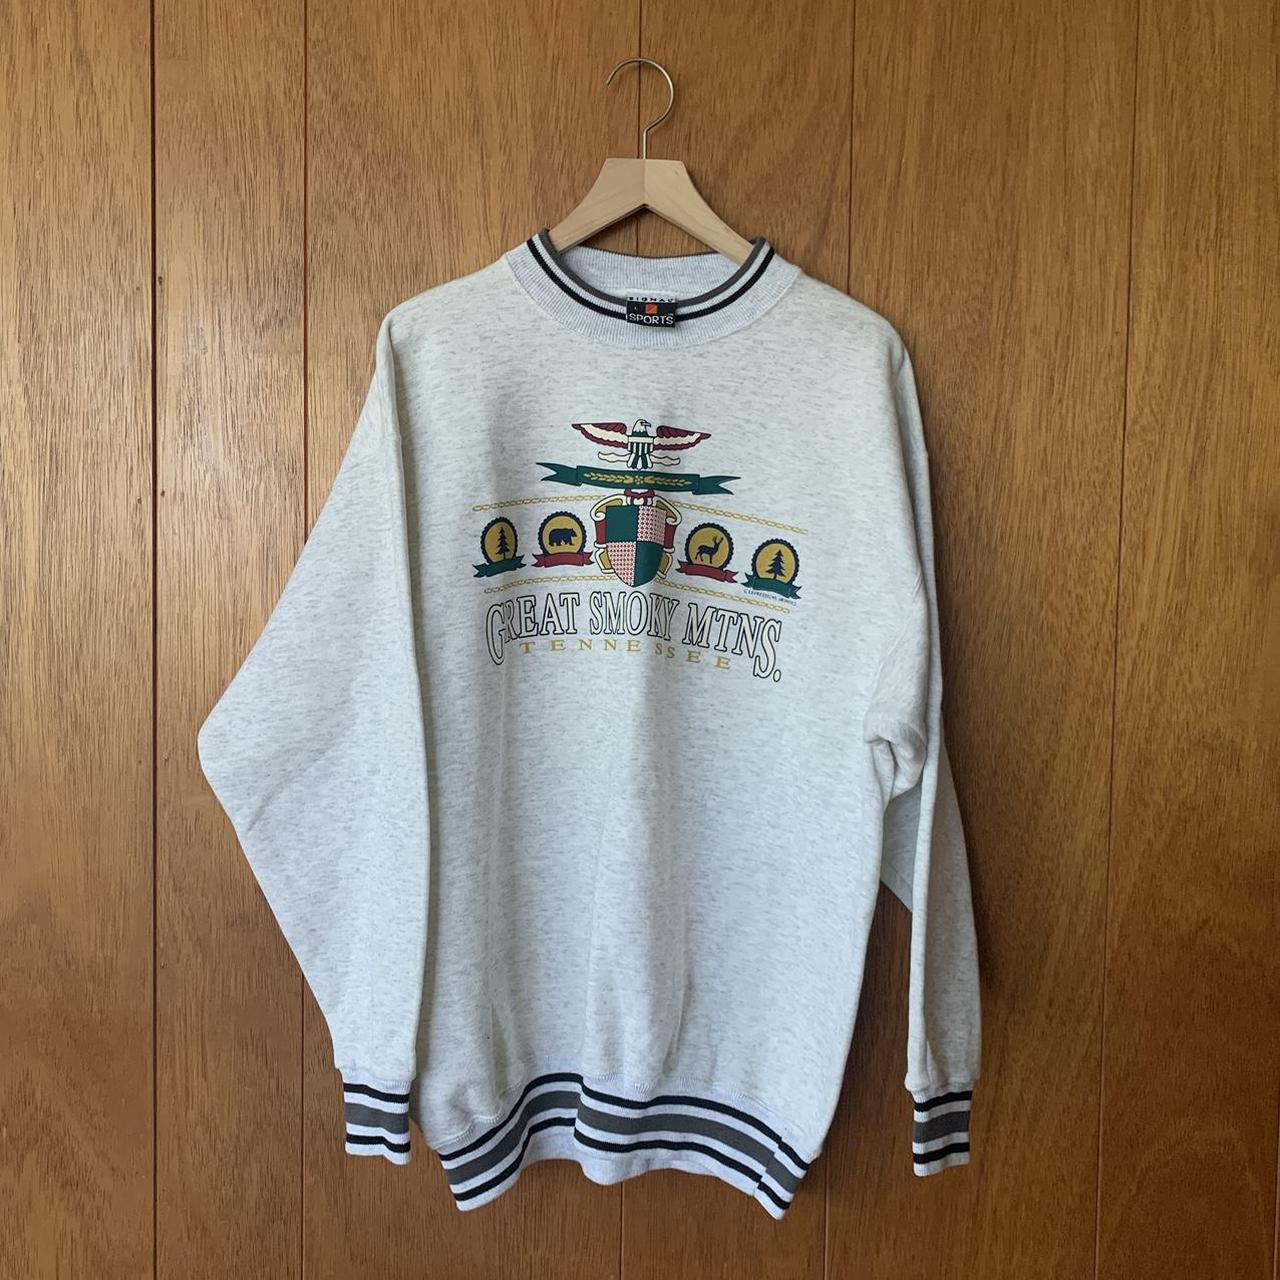 VINTAGE 1990s GREAT SMOKY MOUNTAINS TENNESSEE... - Depop